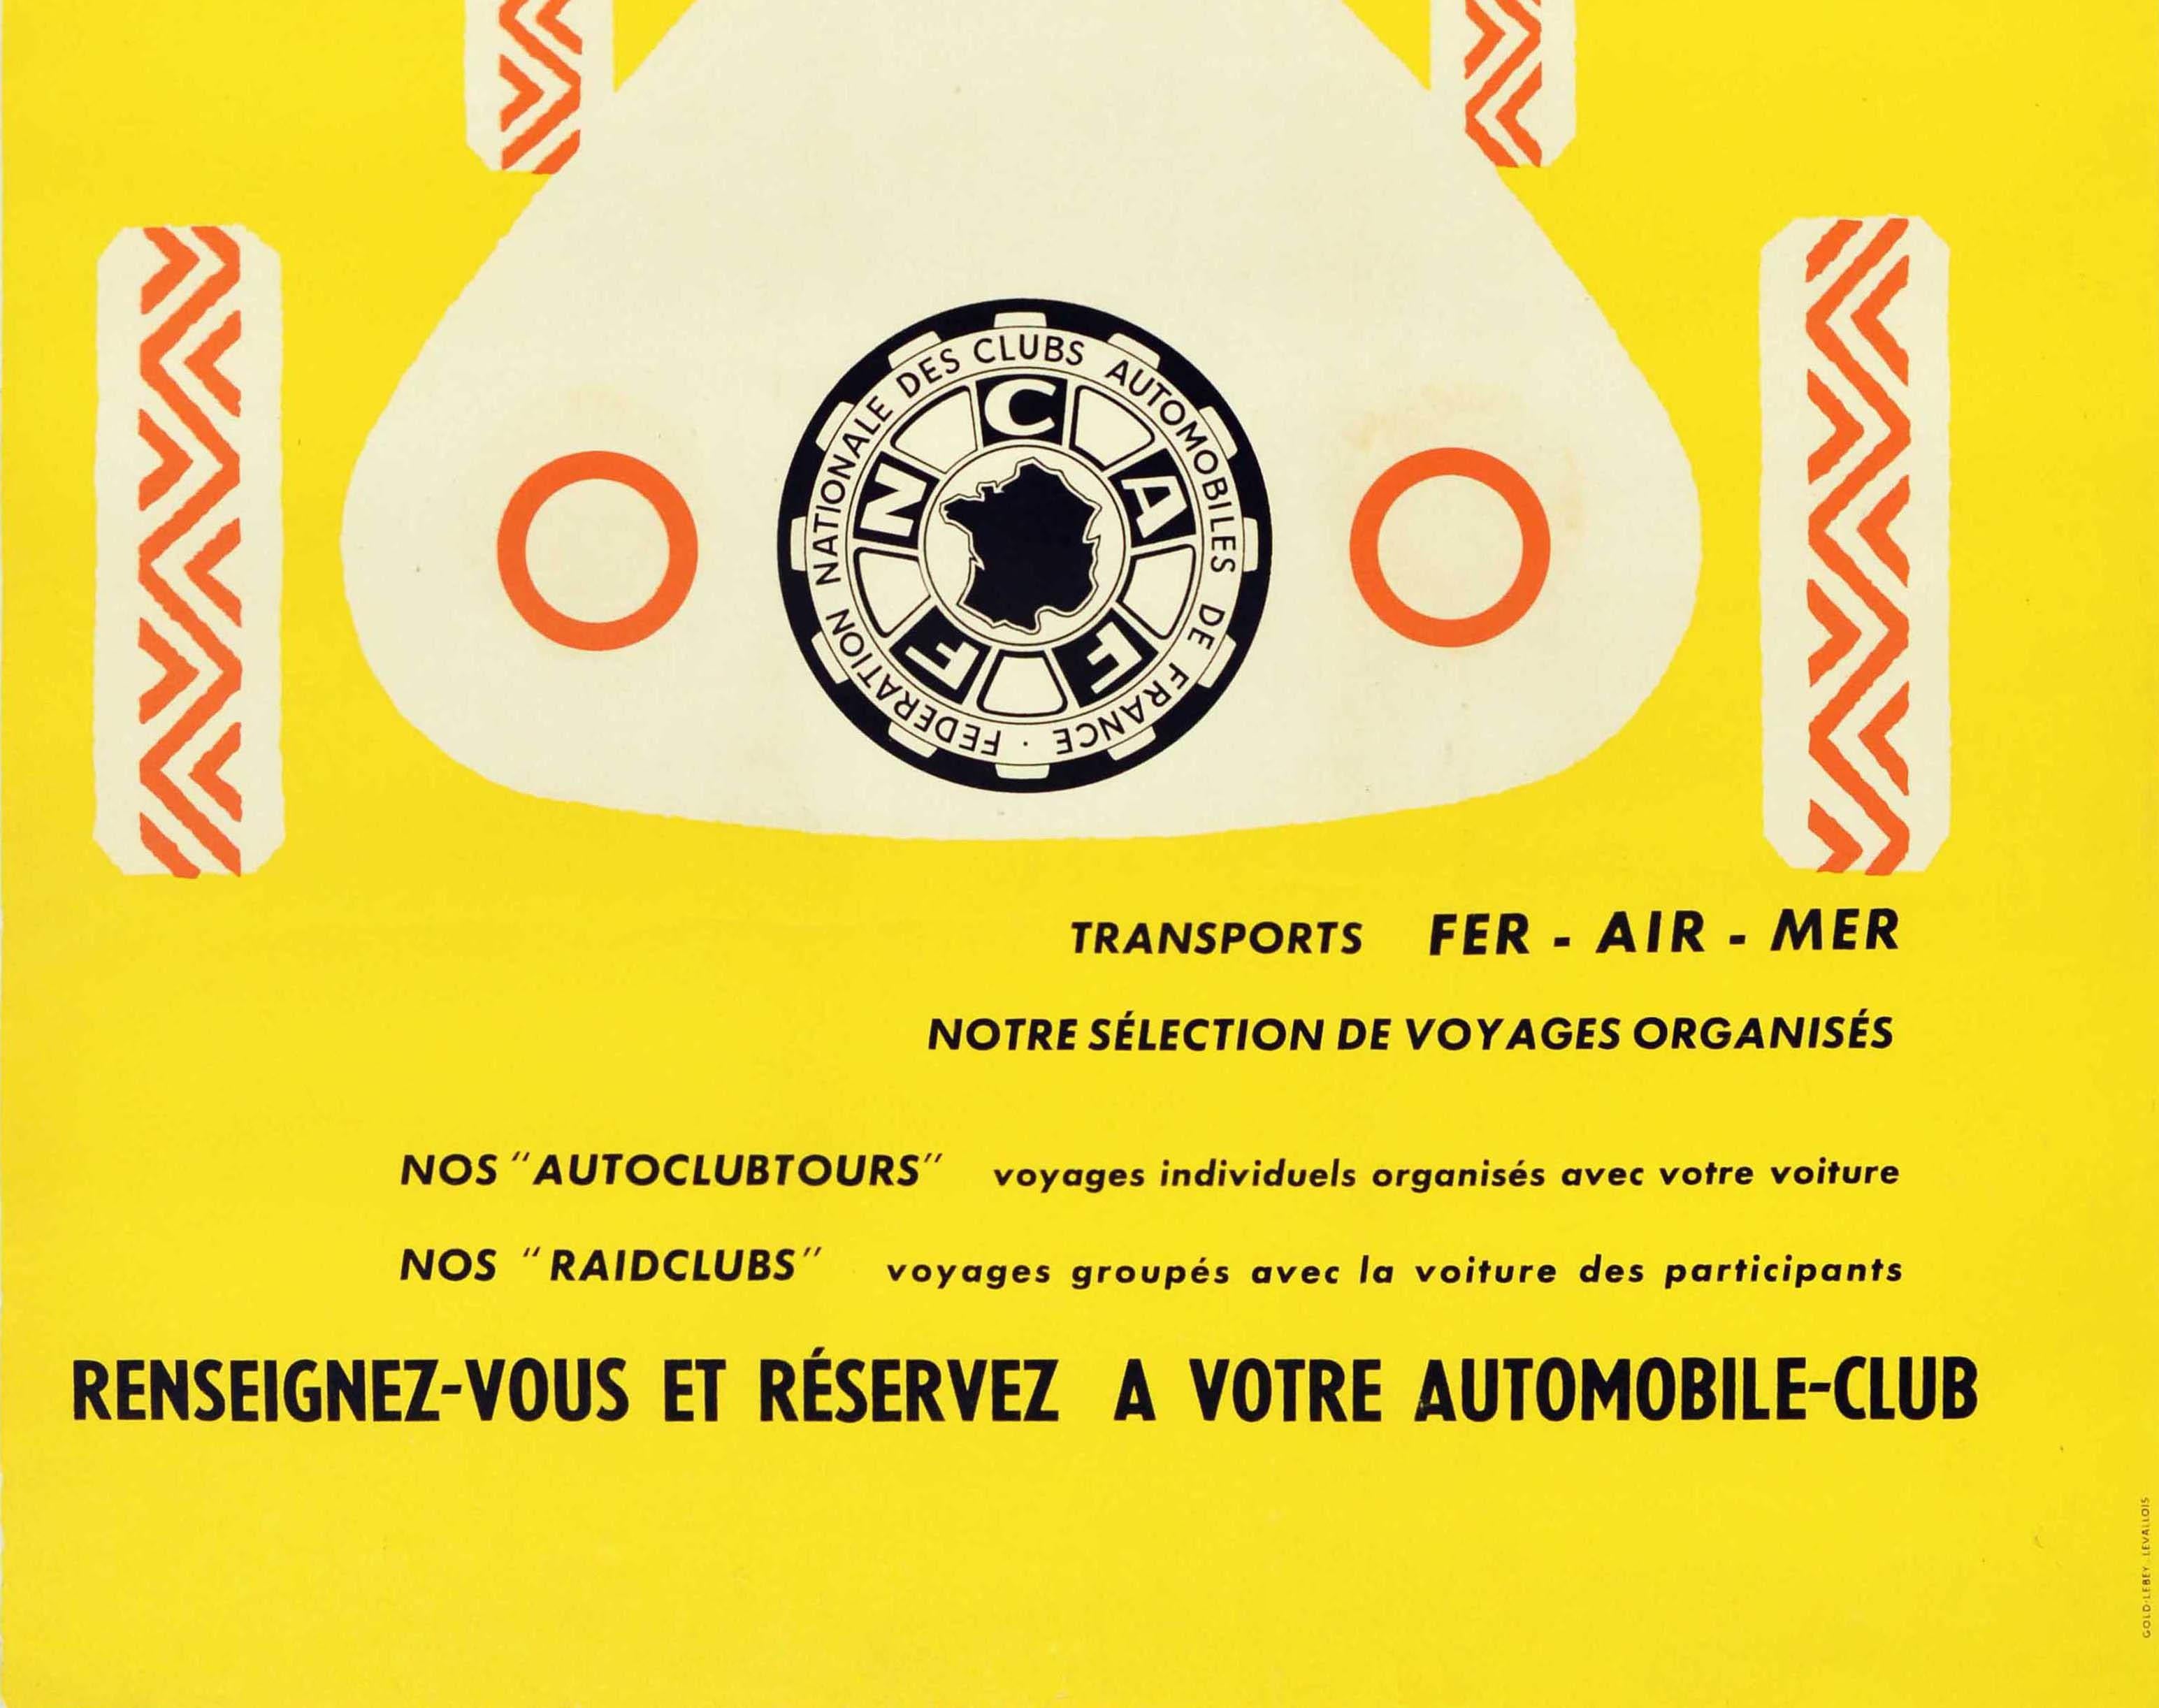 Original vintage poster advertising 67 Travel Offices available to Motorists by rail air sea transport with a selection of organised individual and groups trips - 67 Bureaux de Voyages a la disposition des Automobilistes transports fer air mer Notre